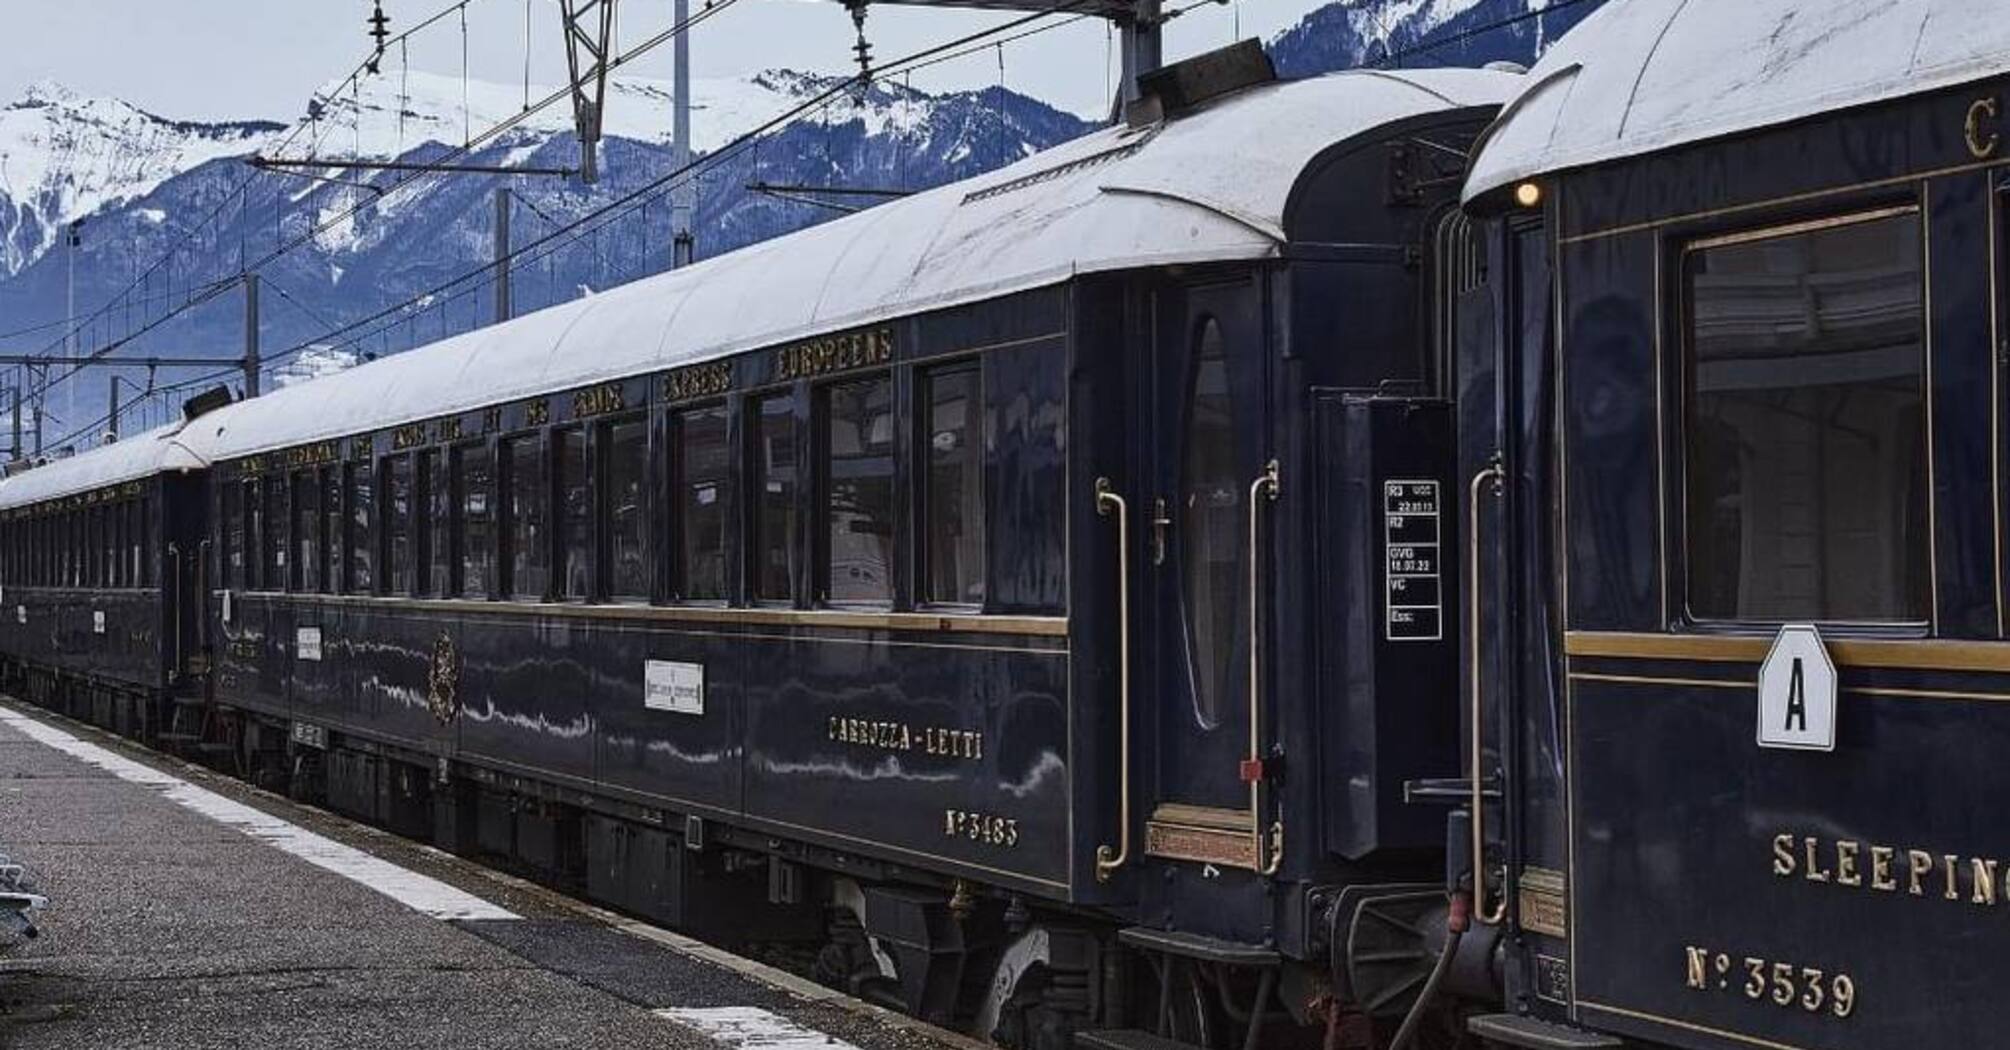 Guests of this famous luxury train must follow two basic rules 